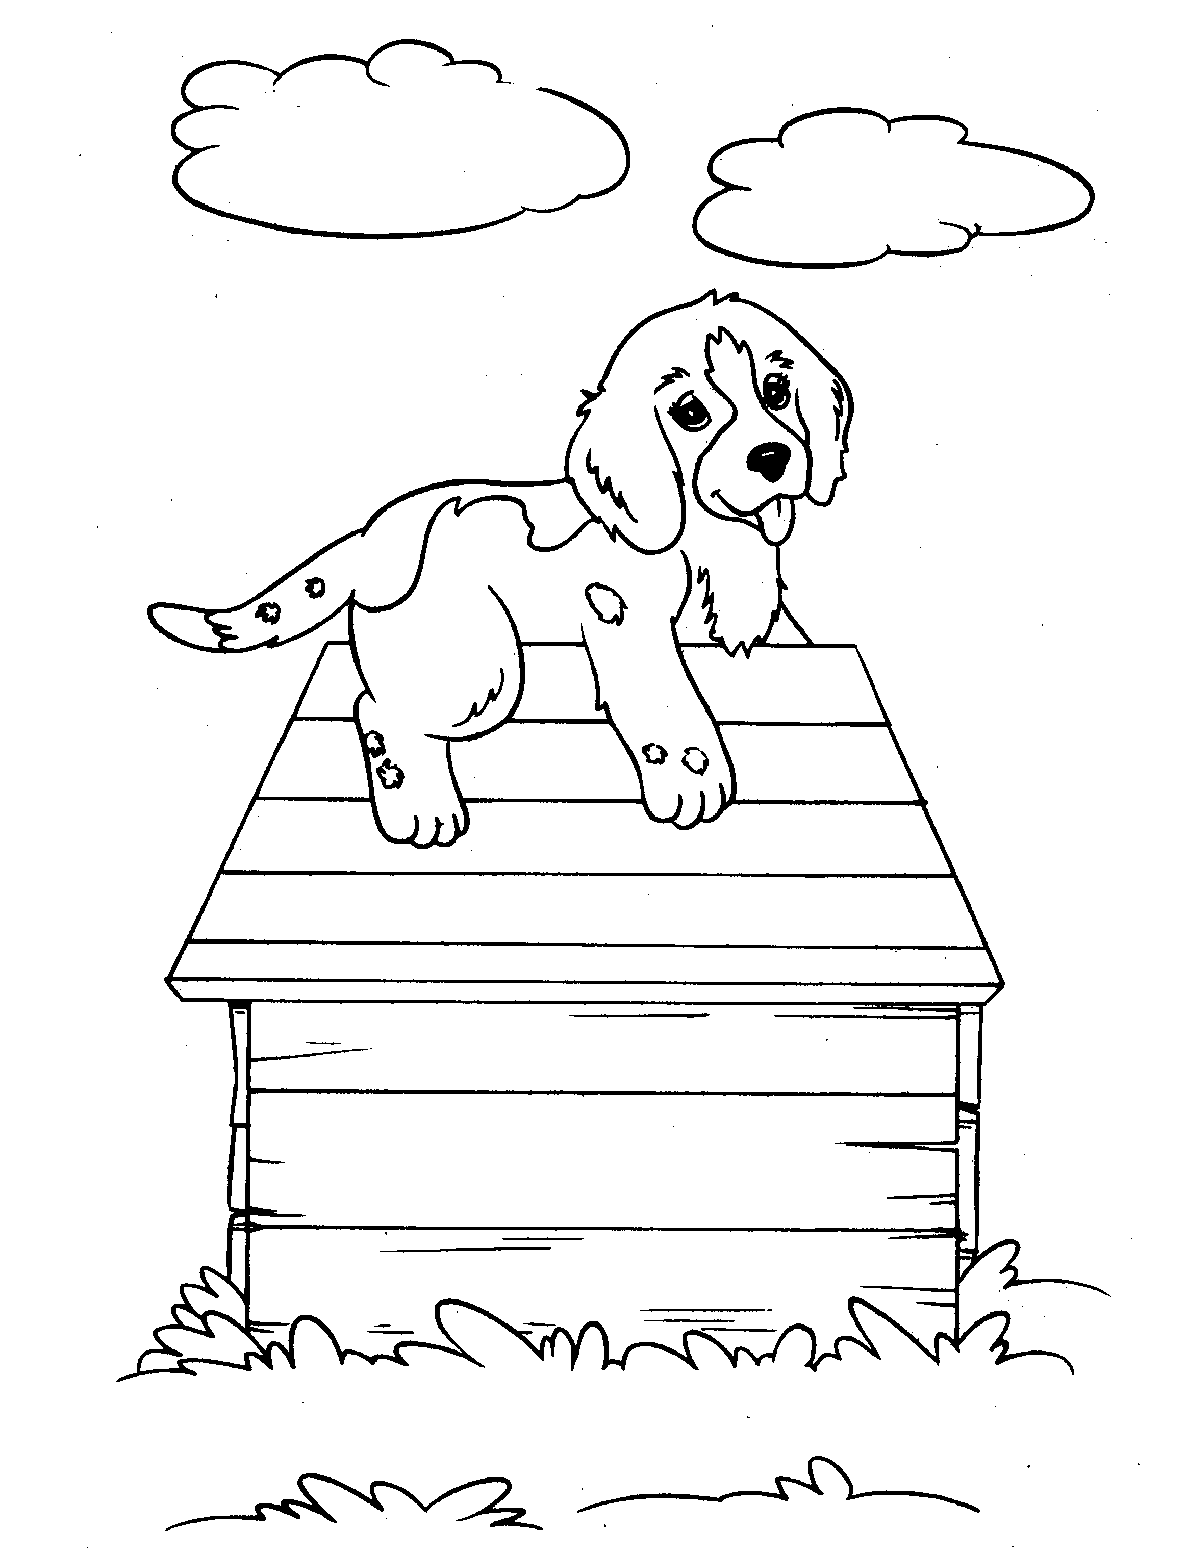 Puppy Dog Coloring Pages Printable Free